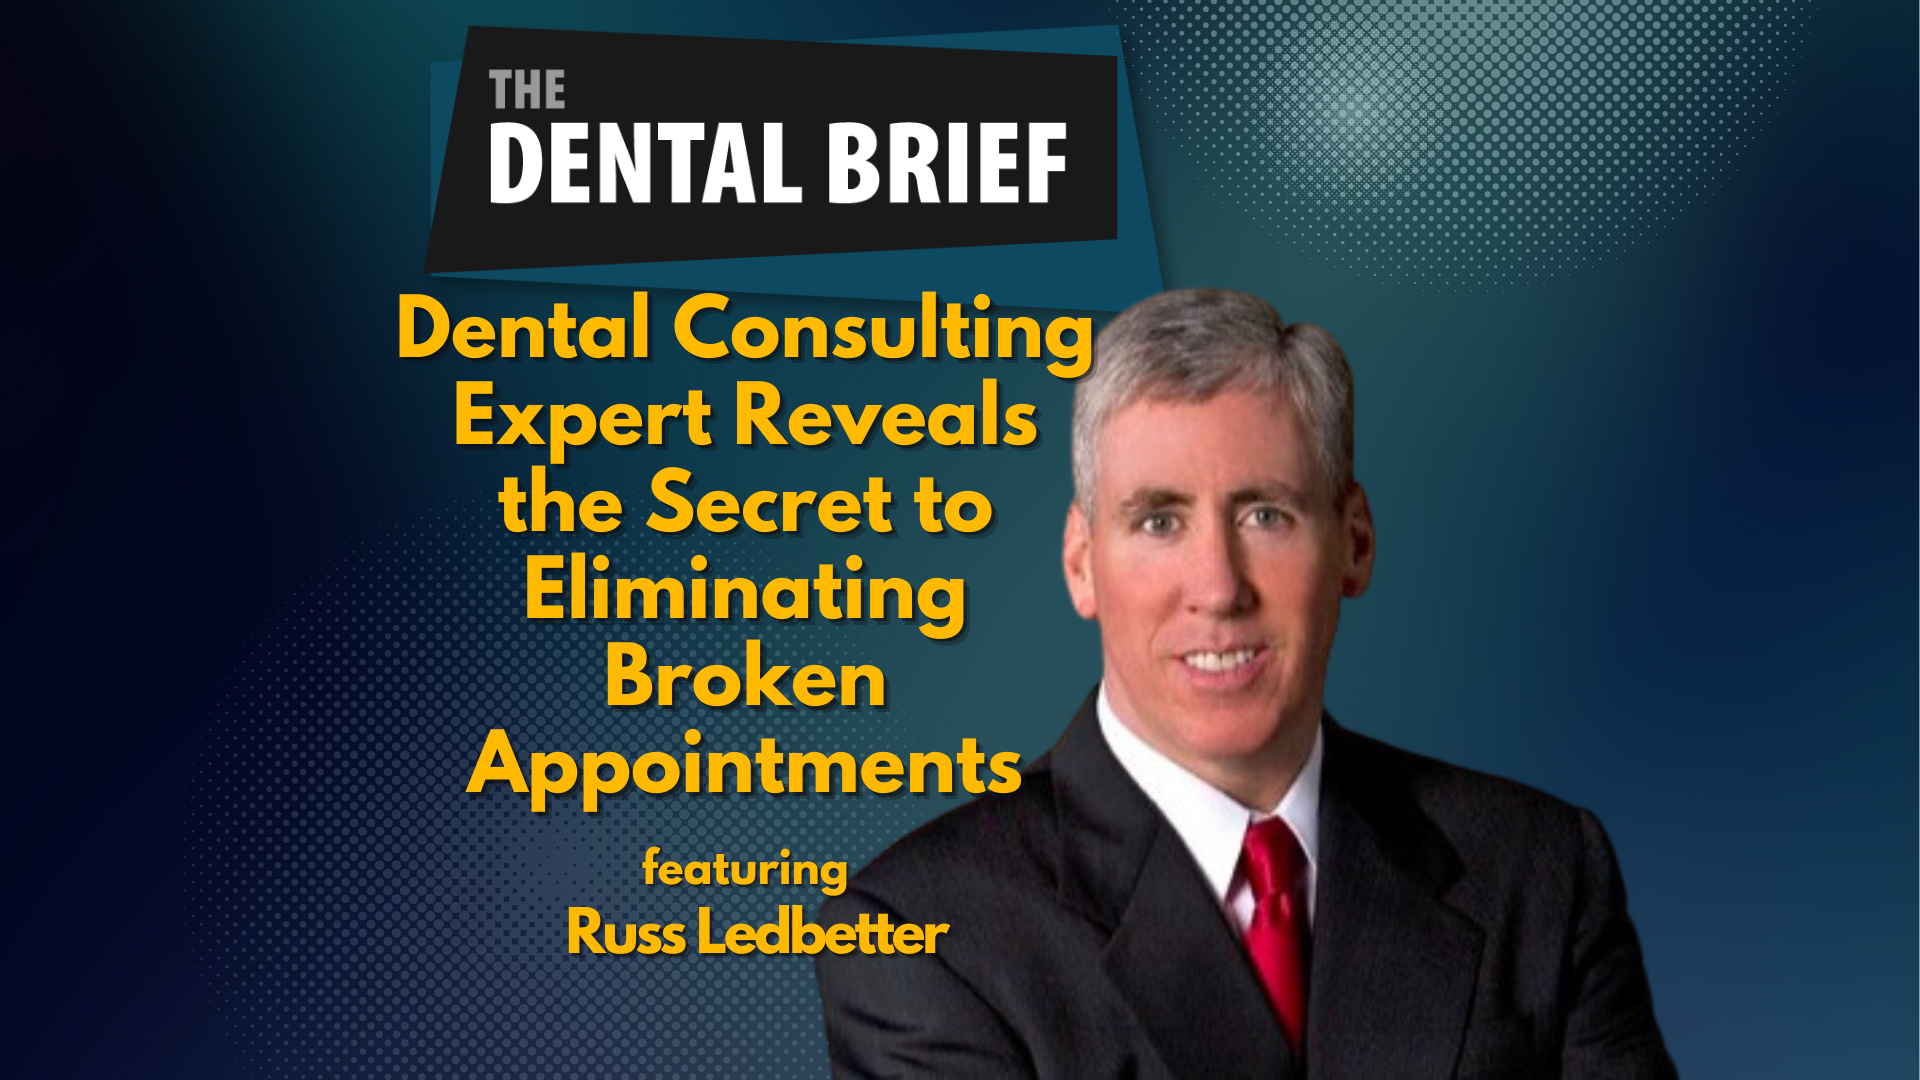 Thumbnail for The dental Brief Podcast feature Russ Ledbetter of www.dentalconsultingexperts.com titled: Dental Consulting Expert Reveals the Secret to Eliminating Broken Appointments